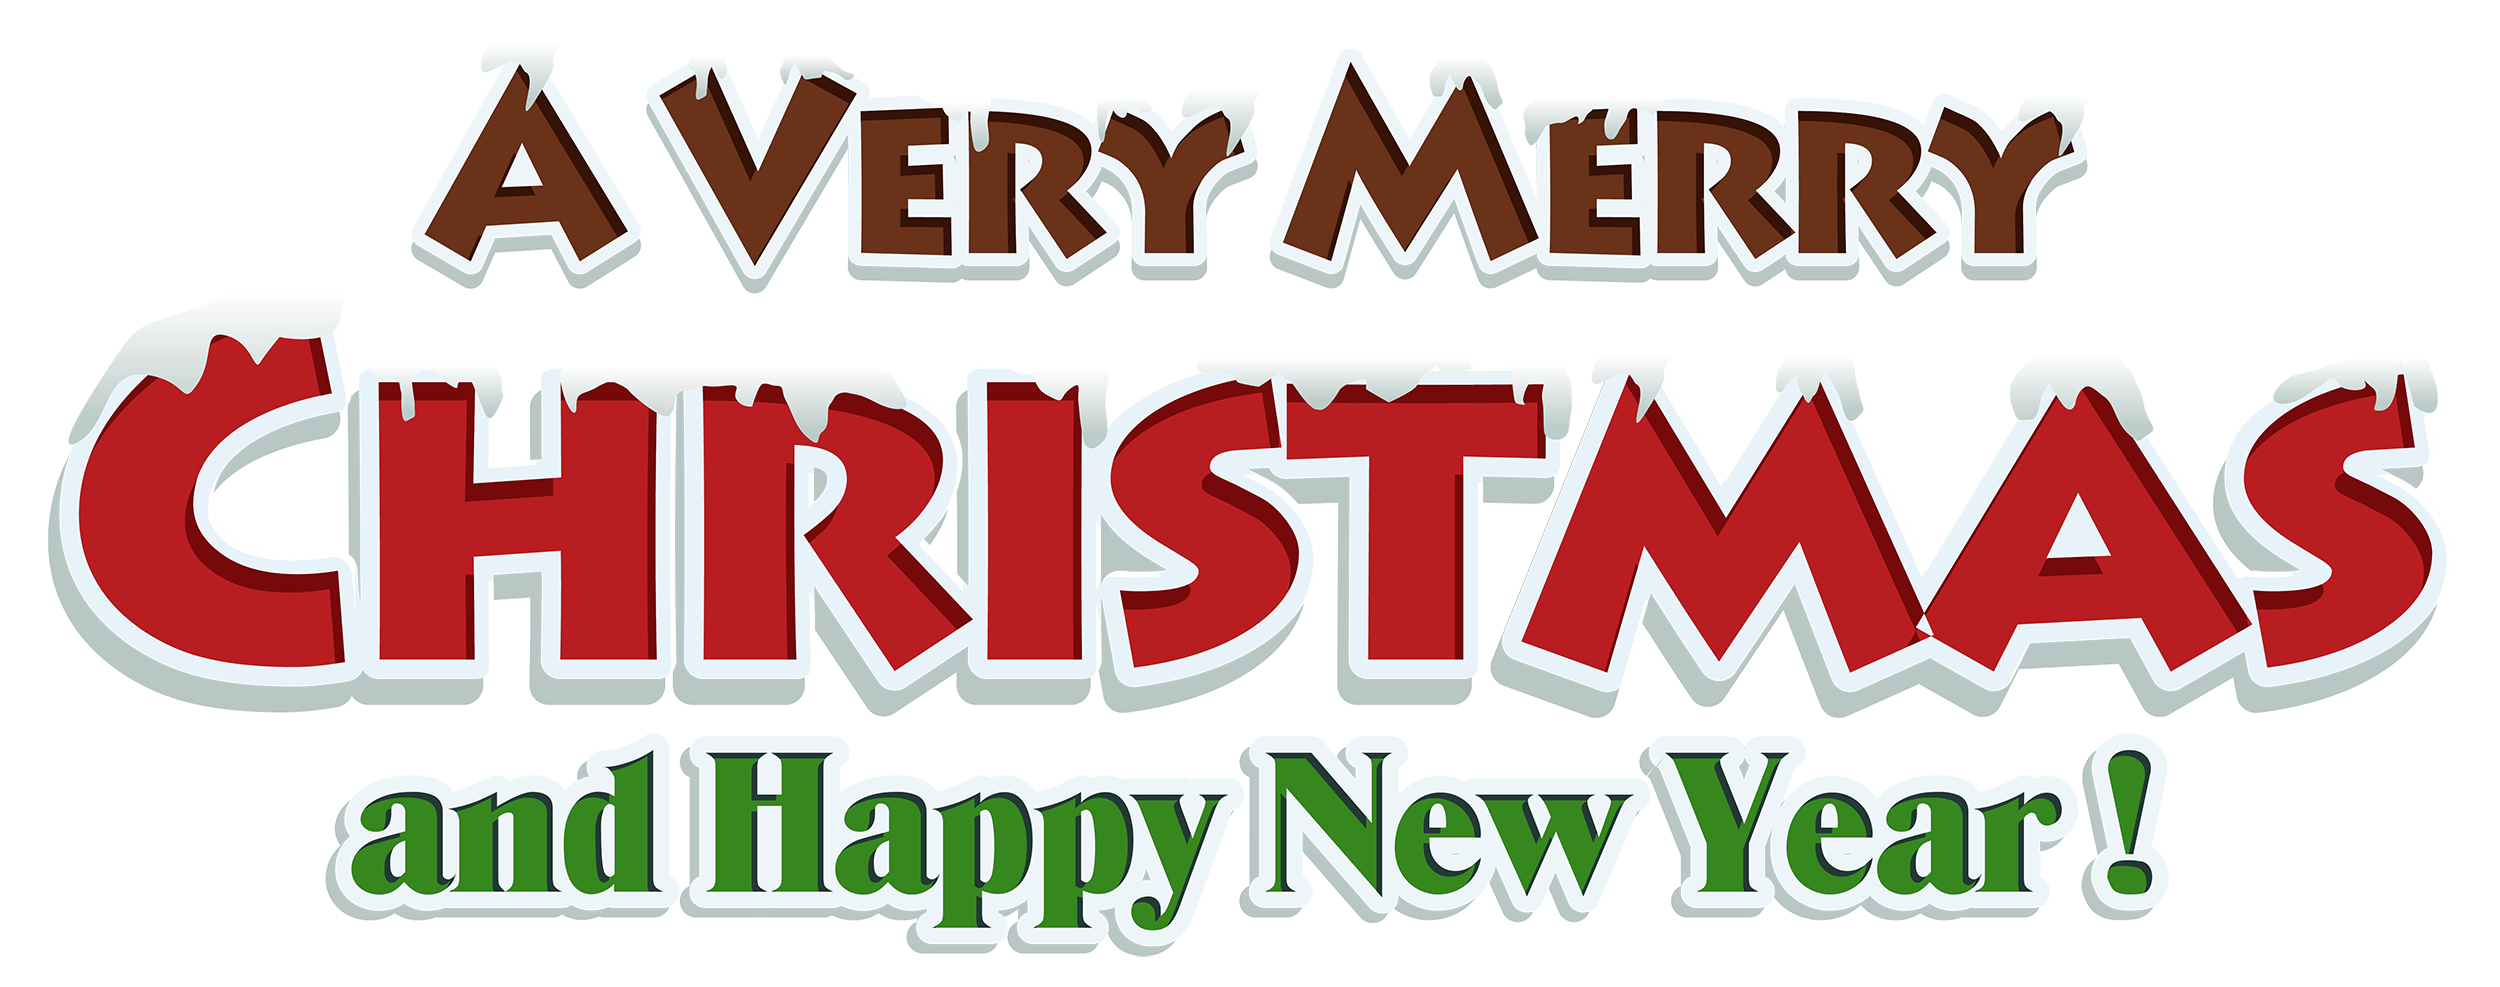 A Very Merry Christmas and Happy New Year PNG Image in Transparent - Merry Christmas Png